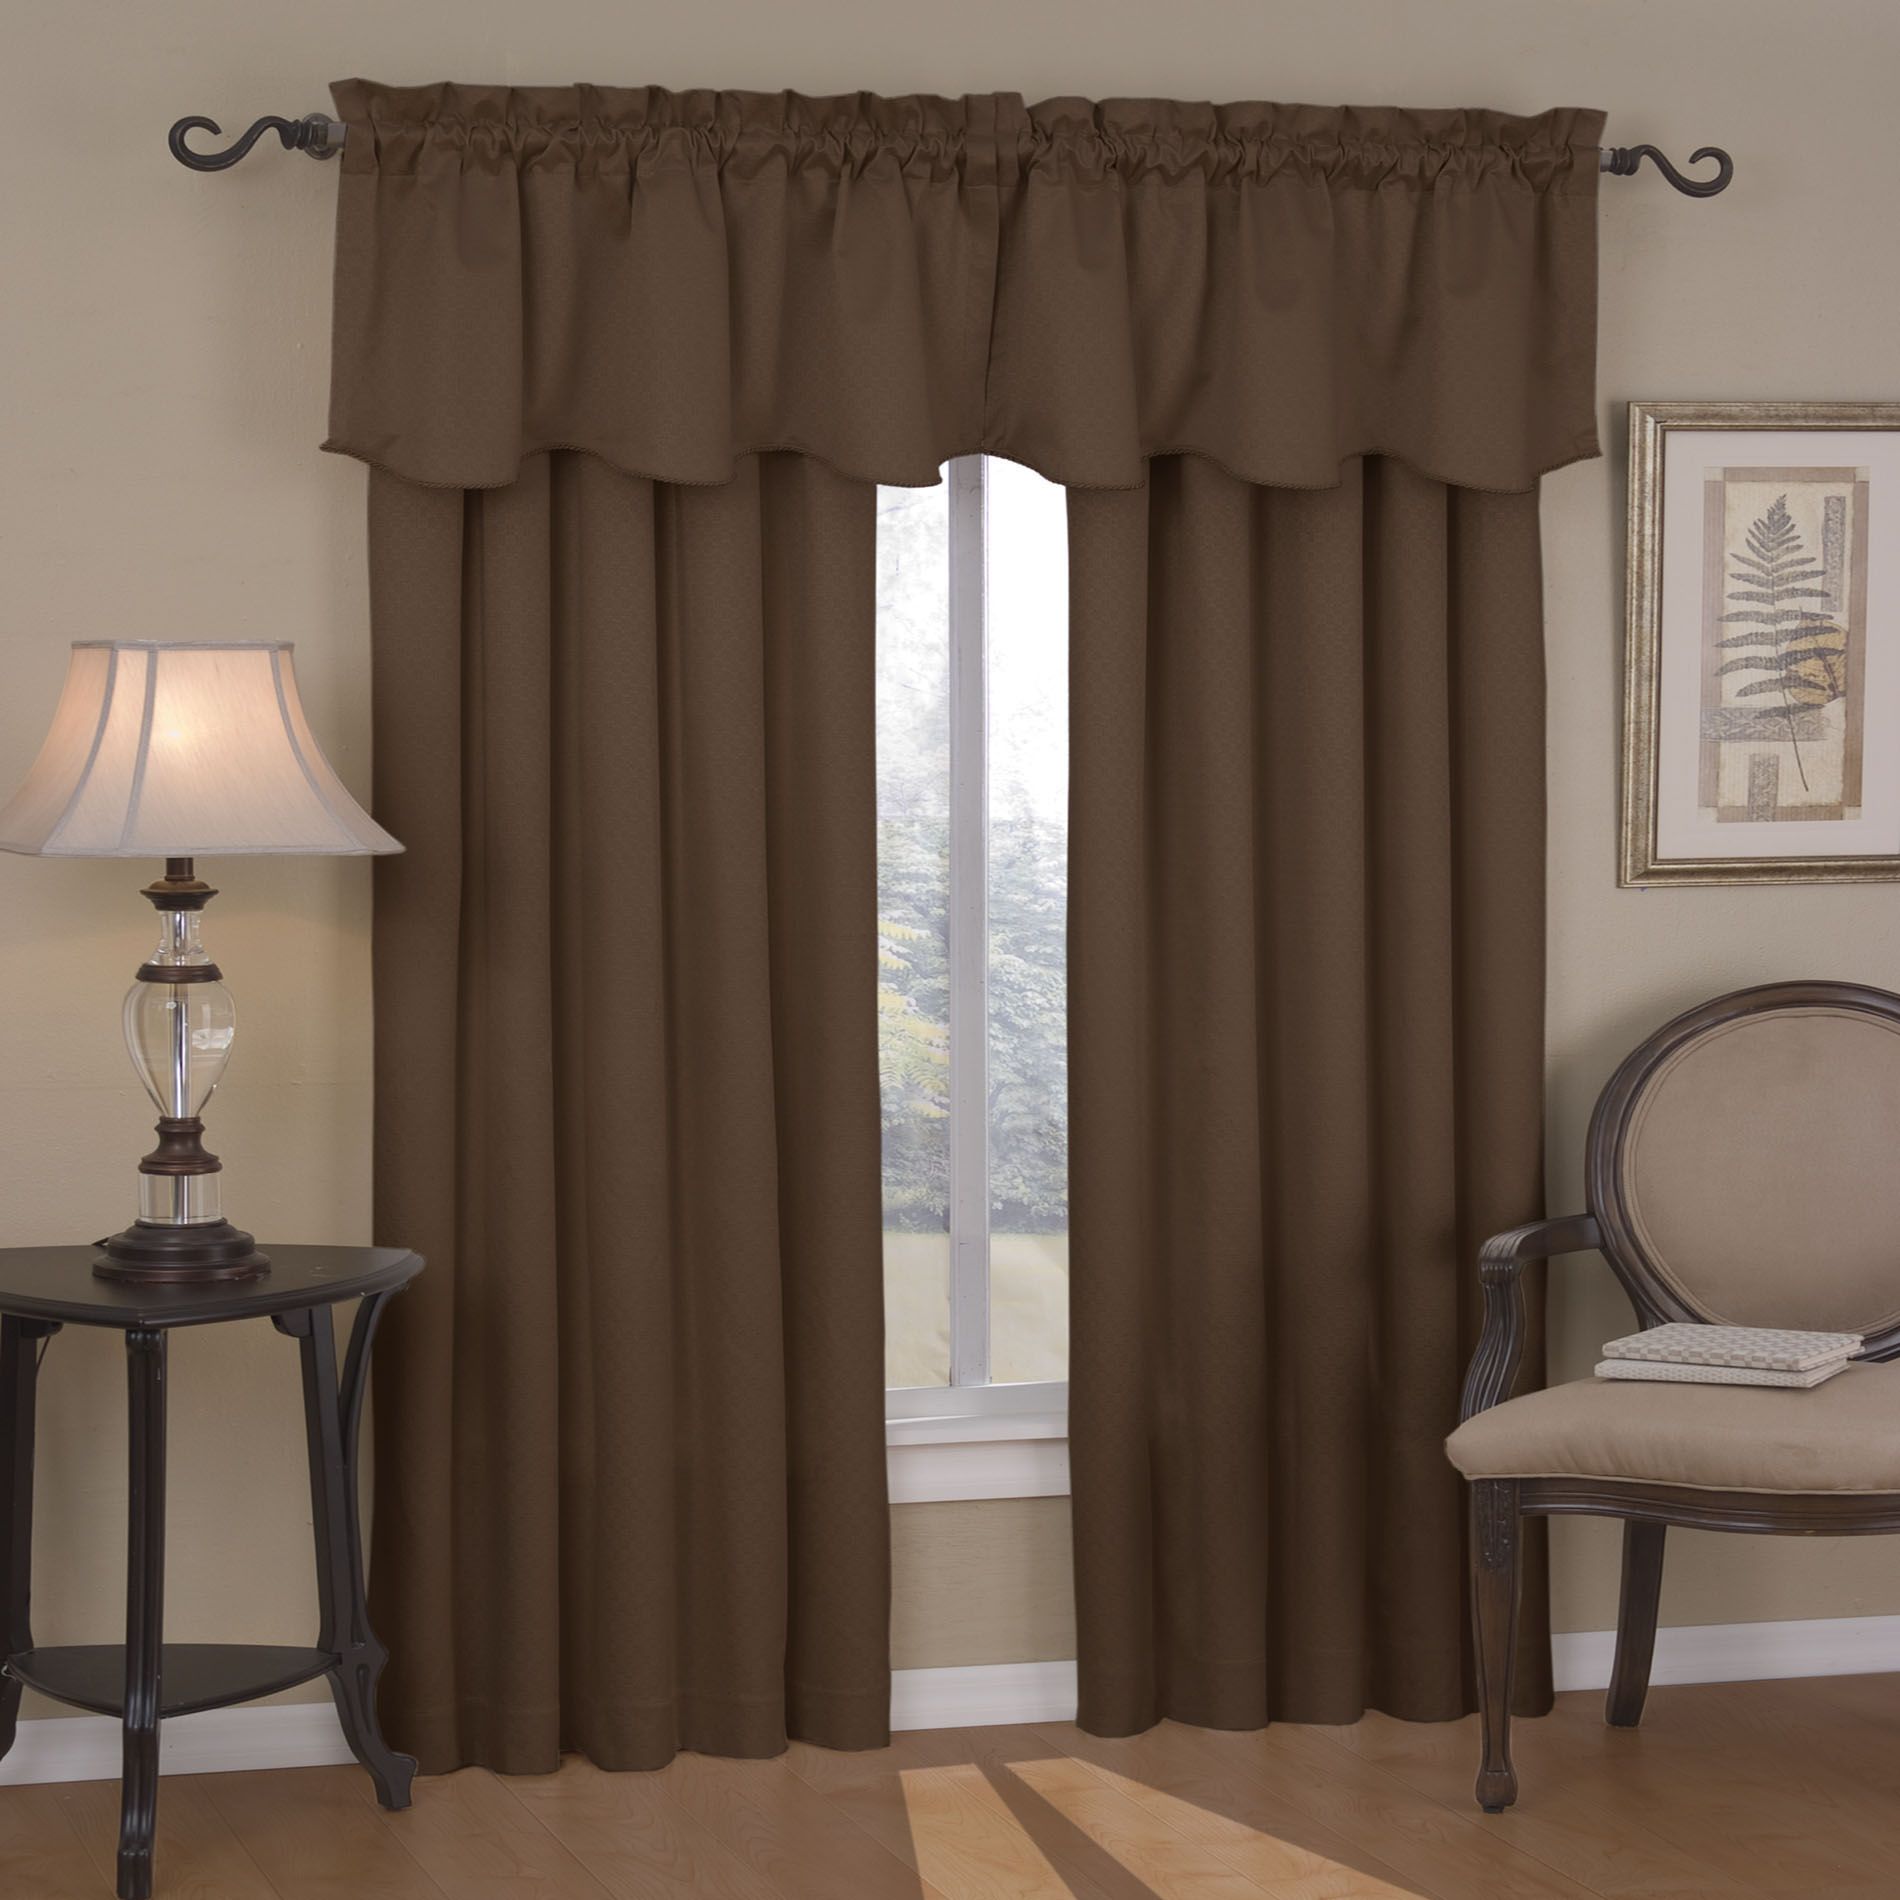 Eclipse Curtains Rialto 42 in. x 19 in. Valance